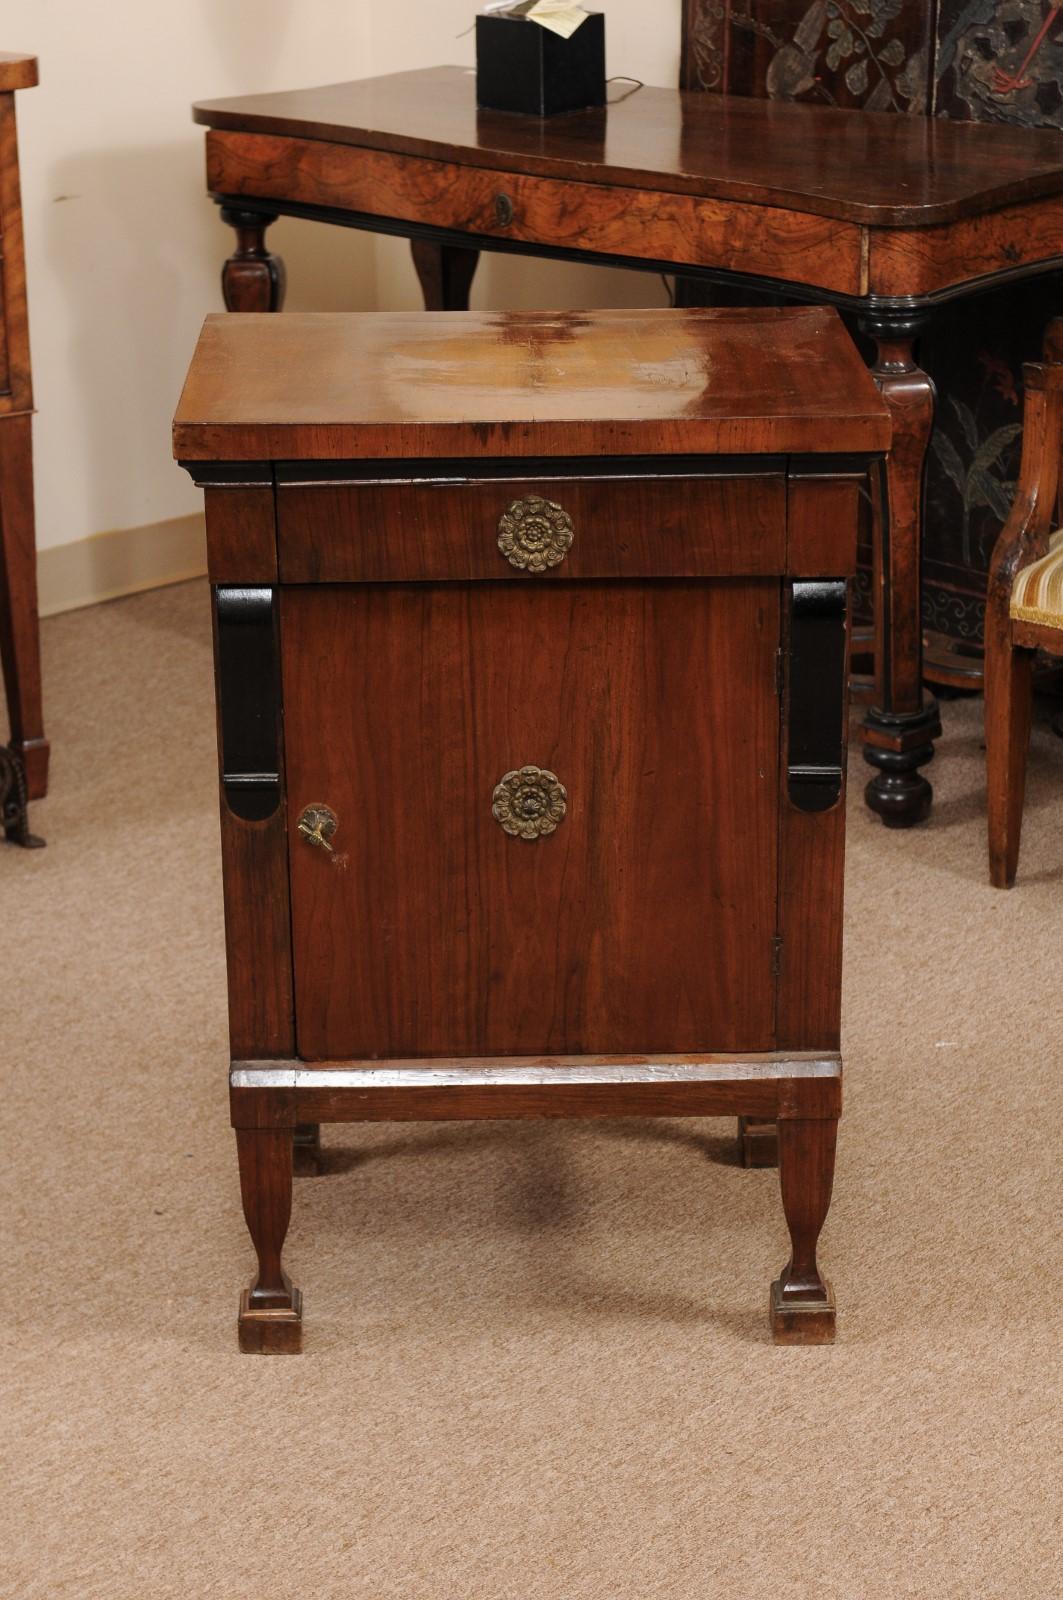 The early 19th century Italian Empire commodino with ebonized detail, 1 drawer above cabinet below and gilt metal mounts. All resting on raised shaped legs.